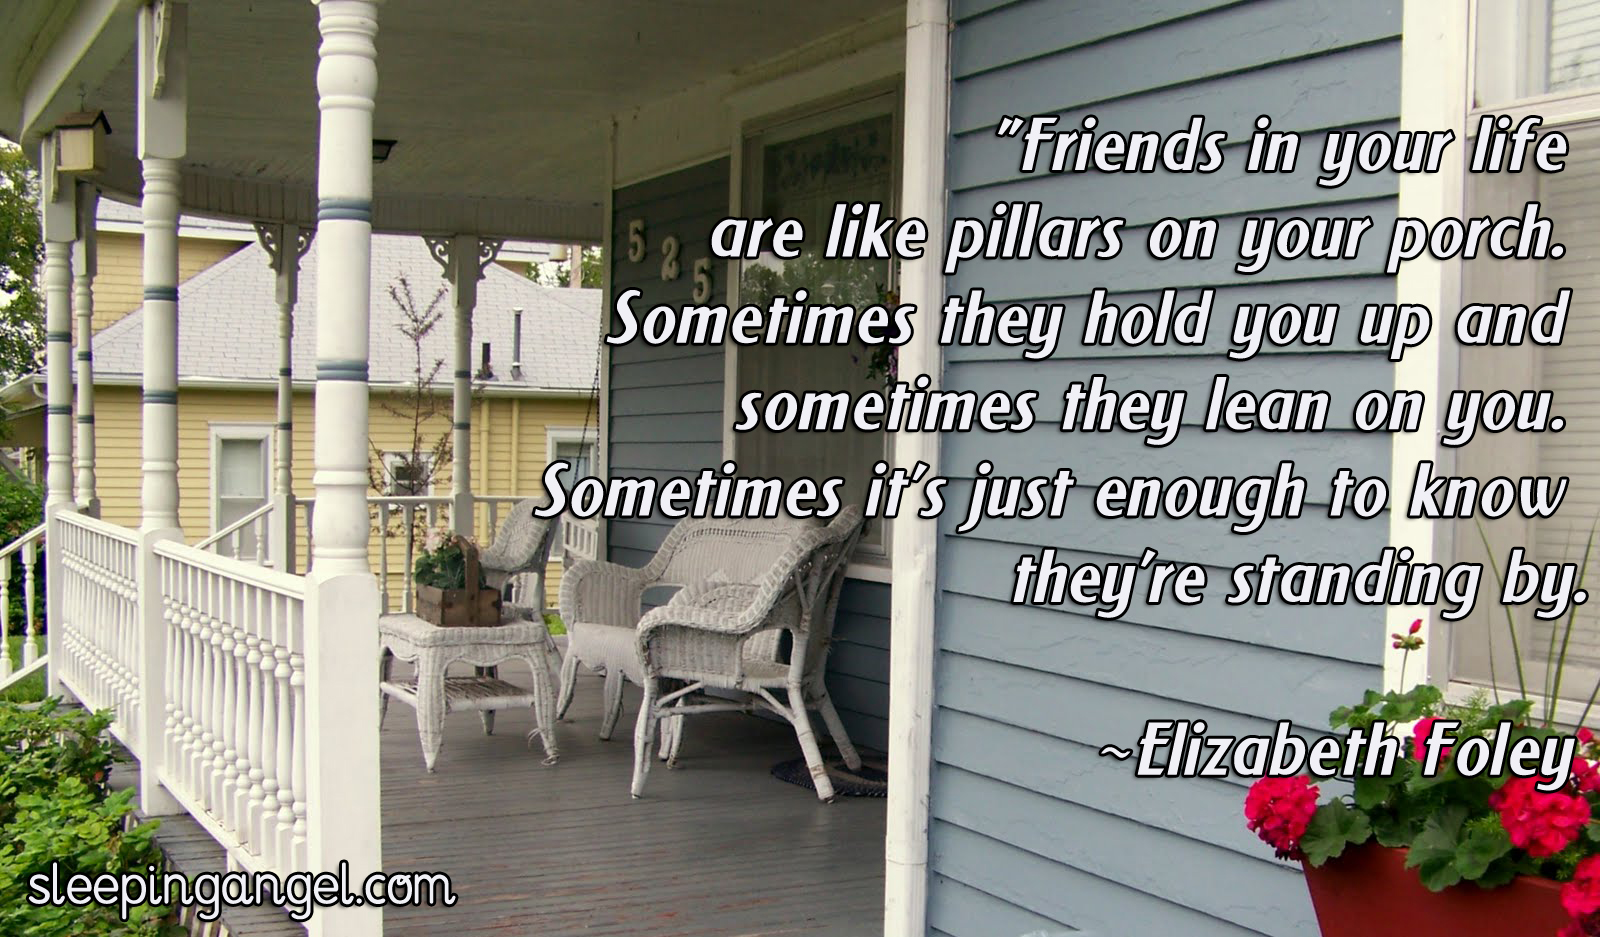 FRIENDS IN YOUR LIFE ARE LIKE PILLARS ON YOUR PORCH. SOMETIMES THEY HOLD YOU UP AND SOMETIMES THEY LEAN ON YOU. SOMETIMES IT’S JUST ENOUGH TO KNOW THEY’RE STANDING BY. –ELIZABETH FOLEY